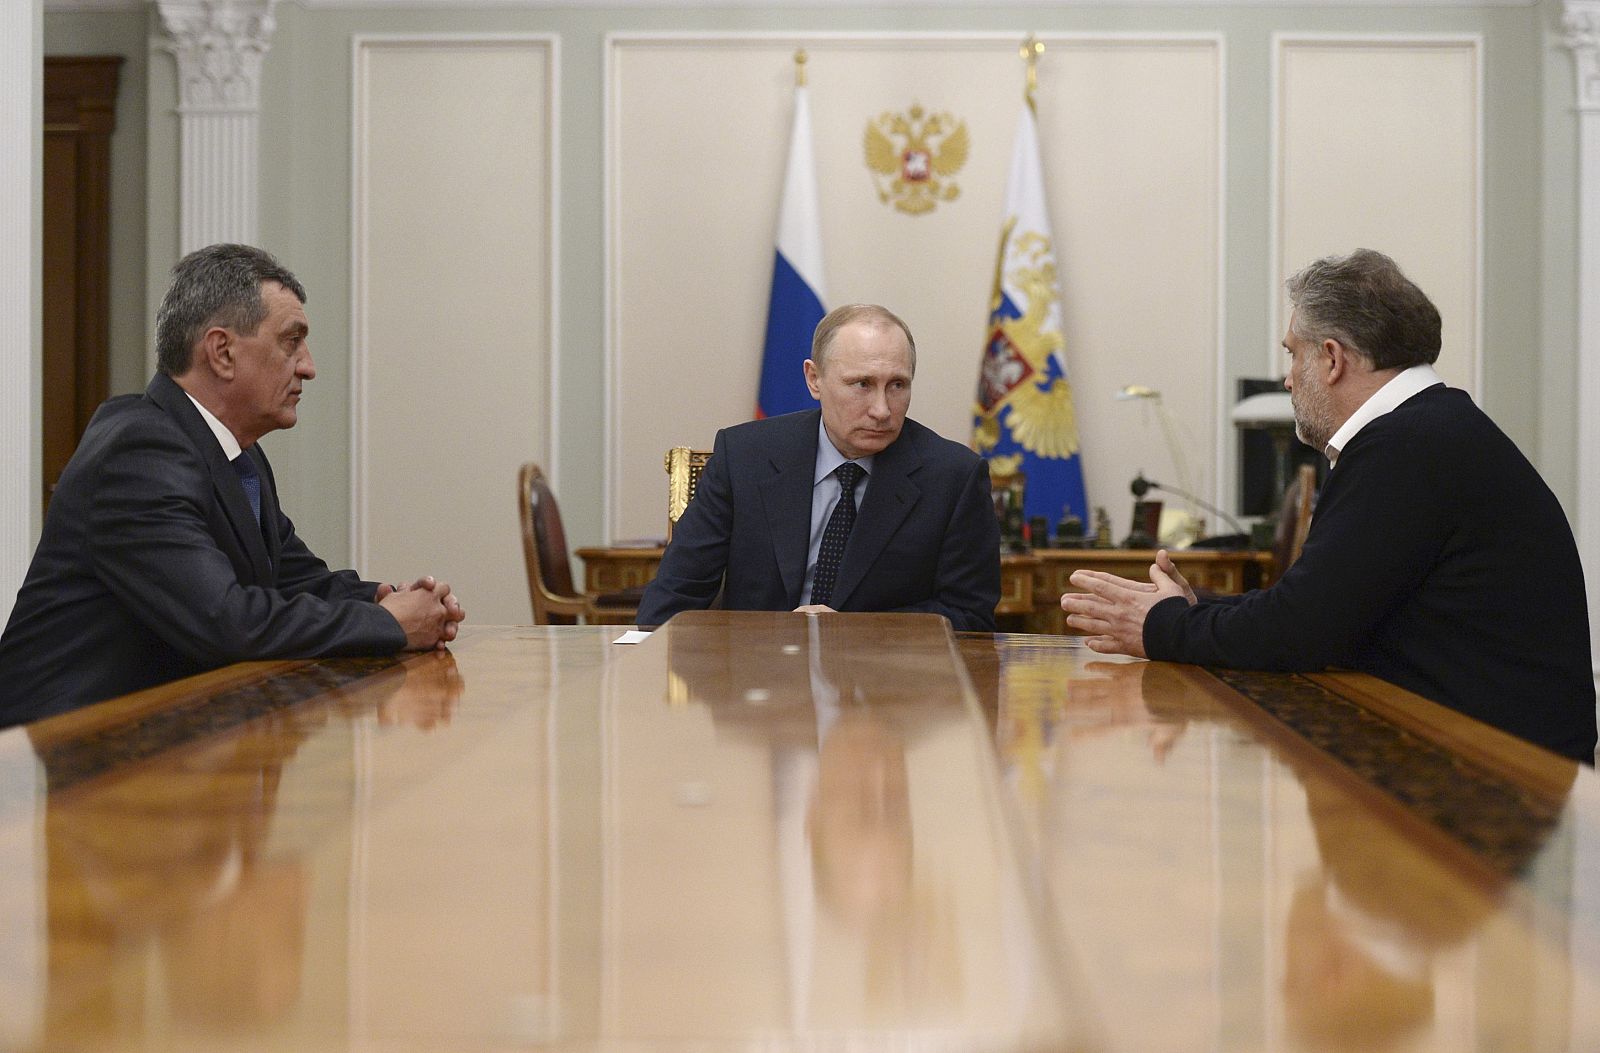 Russian President Putin meets with former deputy commander of the Russian Black Sea Fleet Vice-Admiral Menyailo and Sevastopol head Chaliy at Novo-Ogaryovo state residence outside Moscow